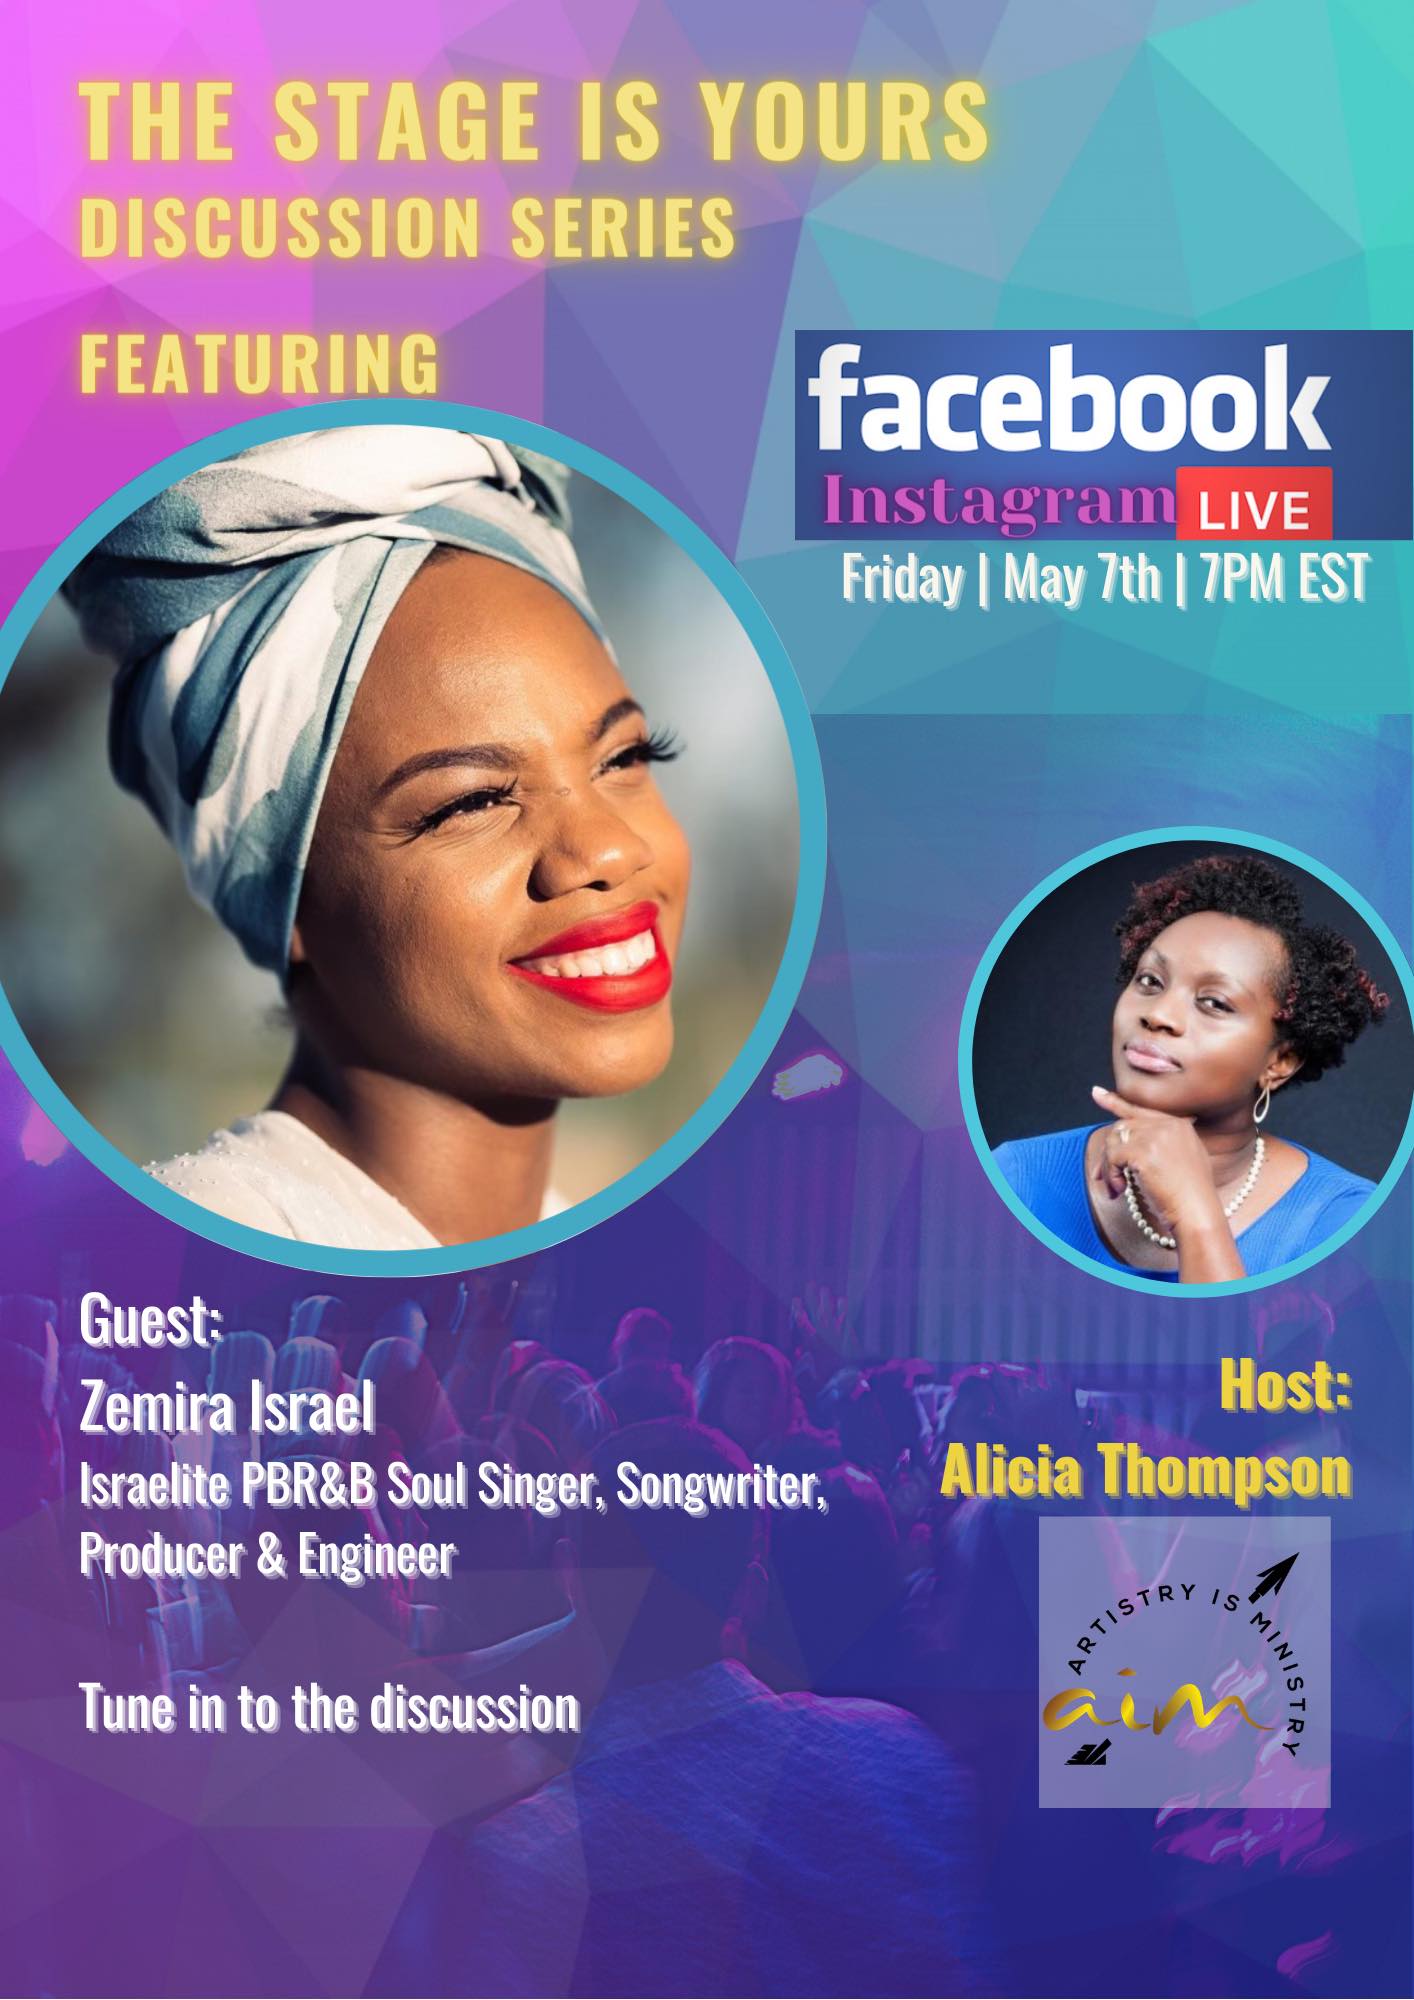 Zemira Israel interview with Alicia Thompson Zipporah of The Stage is Yours